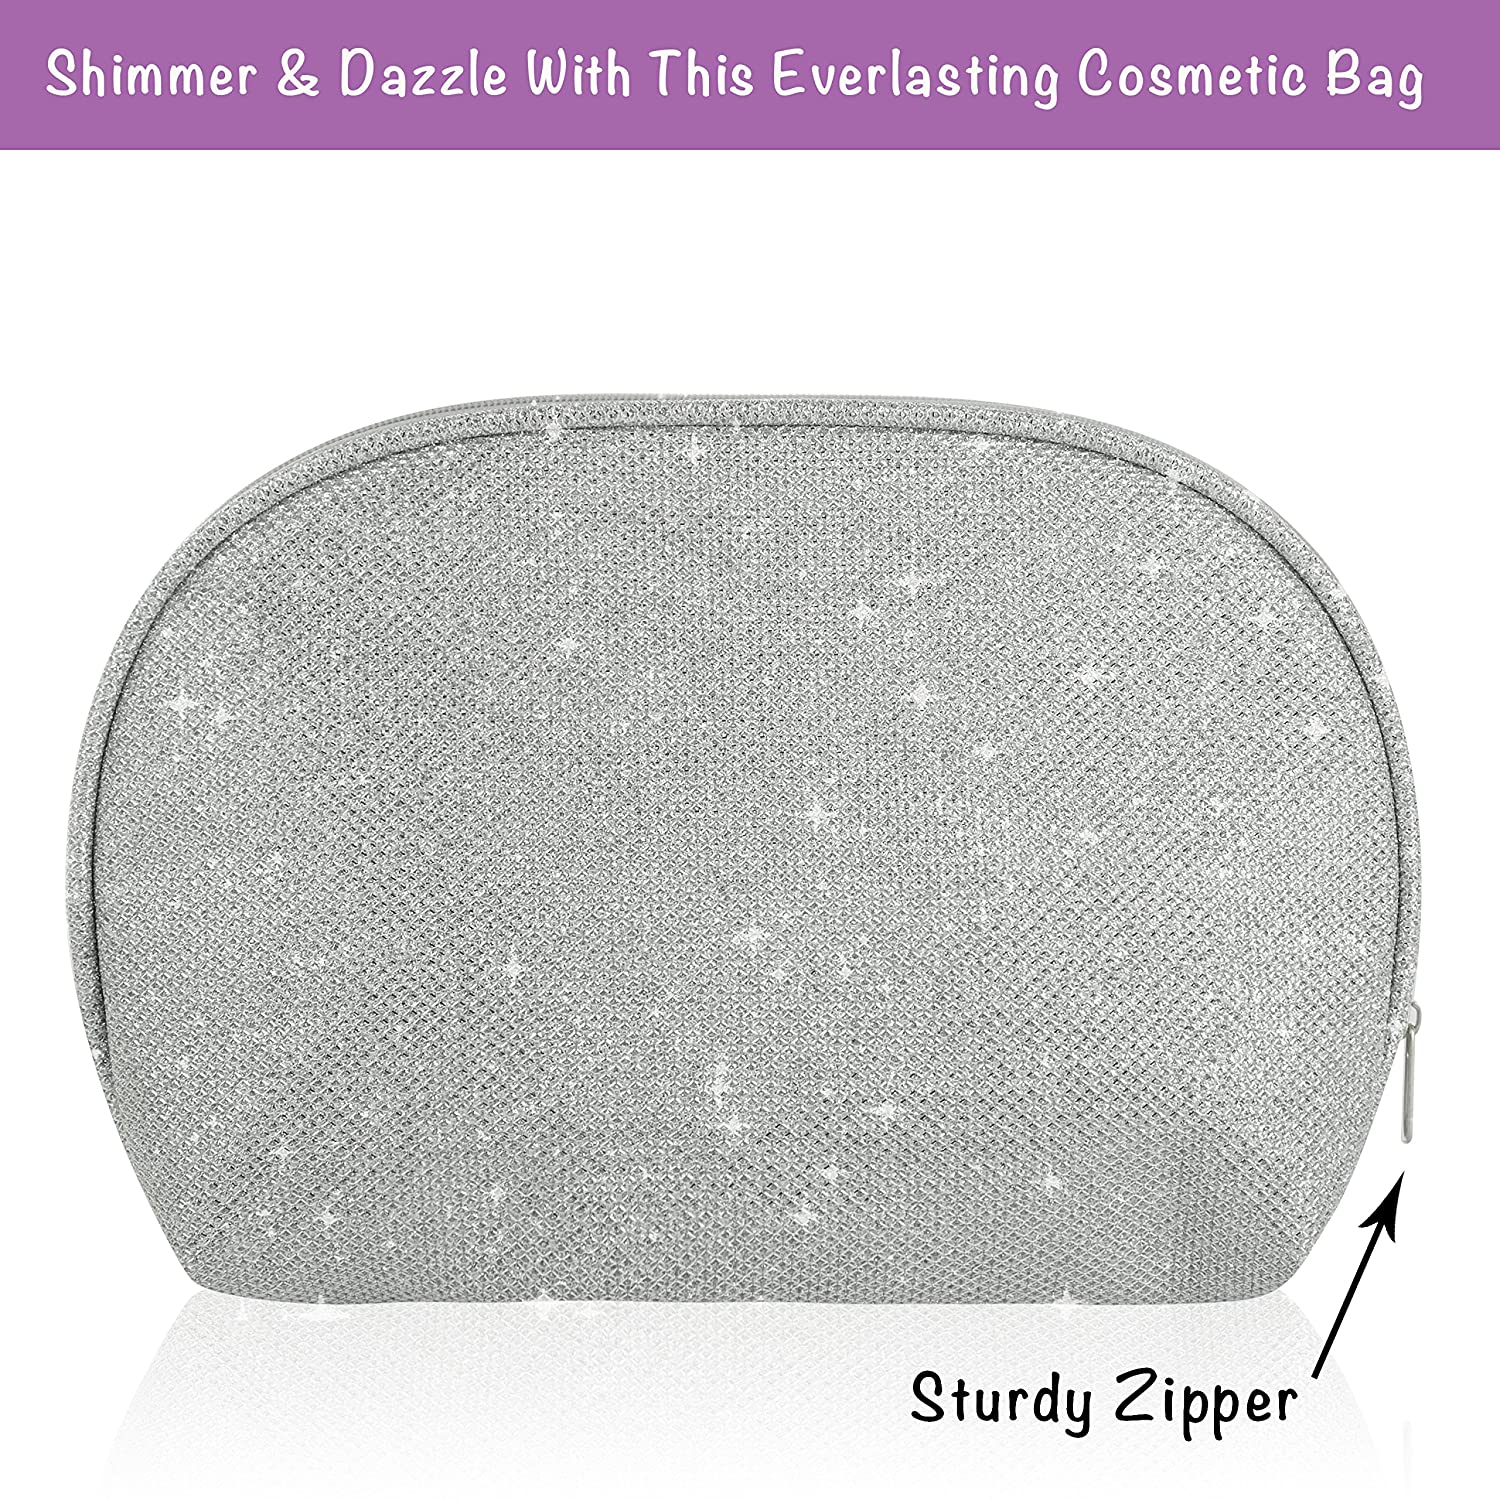 Lovery cosmetic bag, bath gift set accessory, Shimmering & Dazzling Cosmetic Pouch, Luxury Cosmetic Storage, Exquisite Silver Star Design, Soothing Texture and Finish, Everlasting Beauty Accessory, Travel-Size Cosmetic Keeper, Elegant Makeup Storage, Silver and Sparkling Cosmetic Bag, Paraben-Free Beauty Essential Holder, Cruelty-Free Makeup Storage with Sturdy Zipper